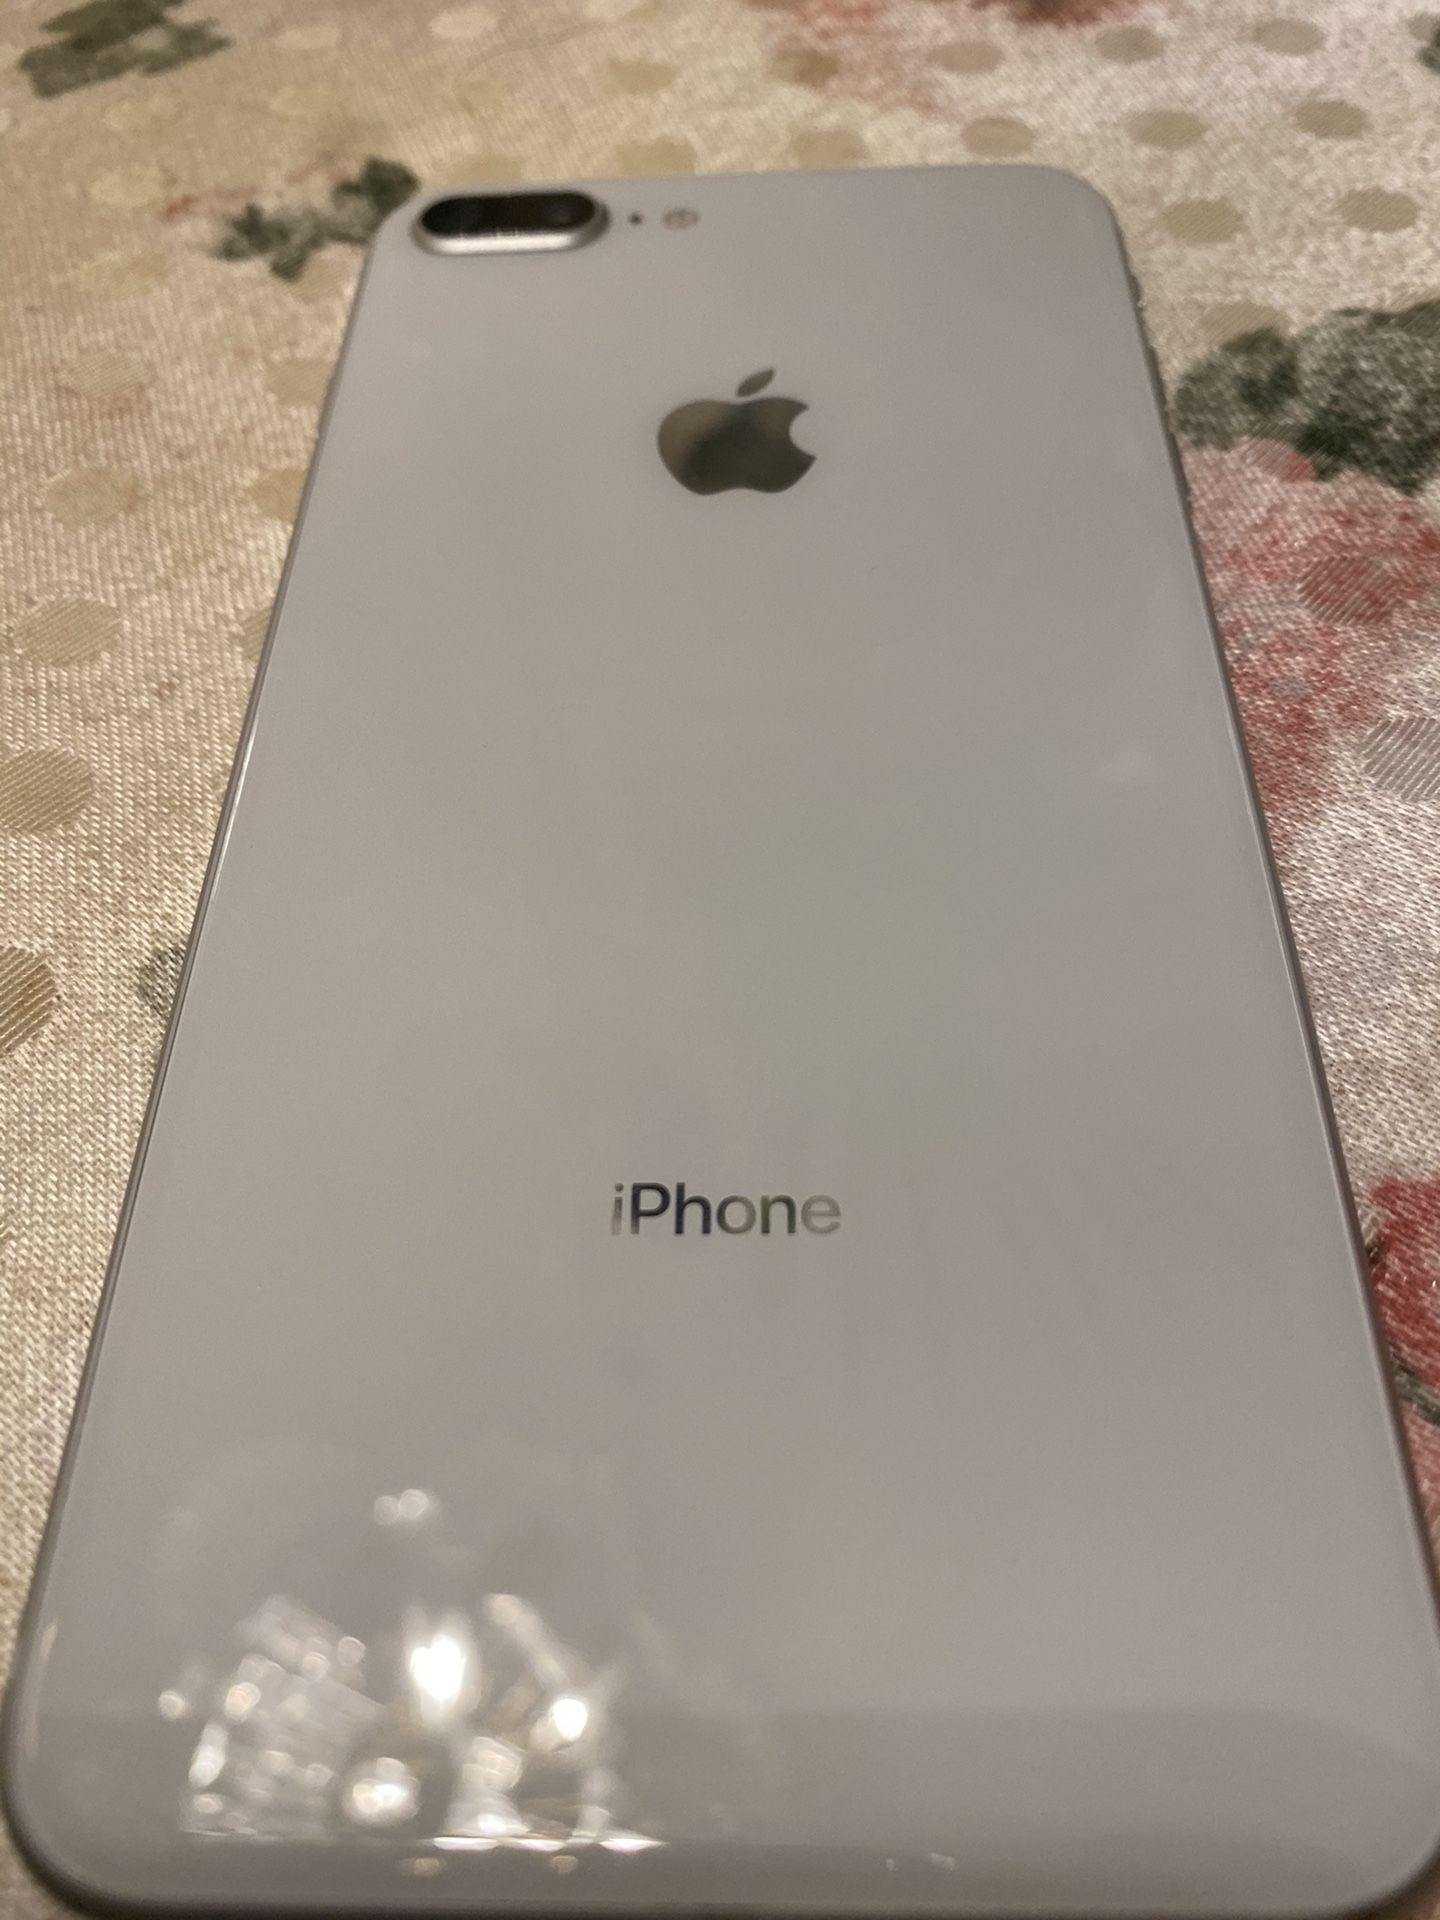 iPhone 8+ for sale (unlocked) 64GB